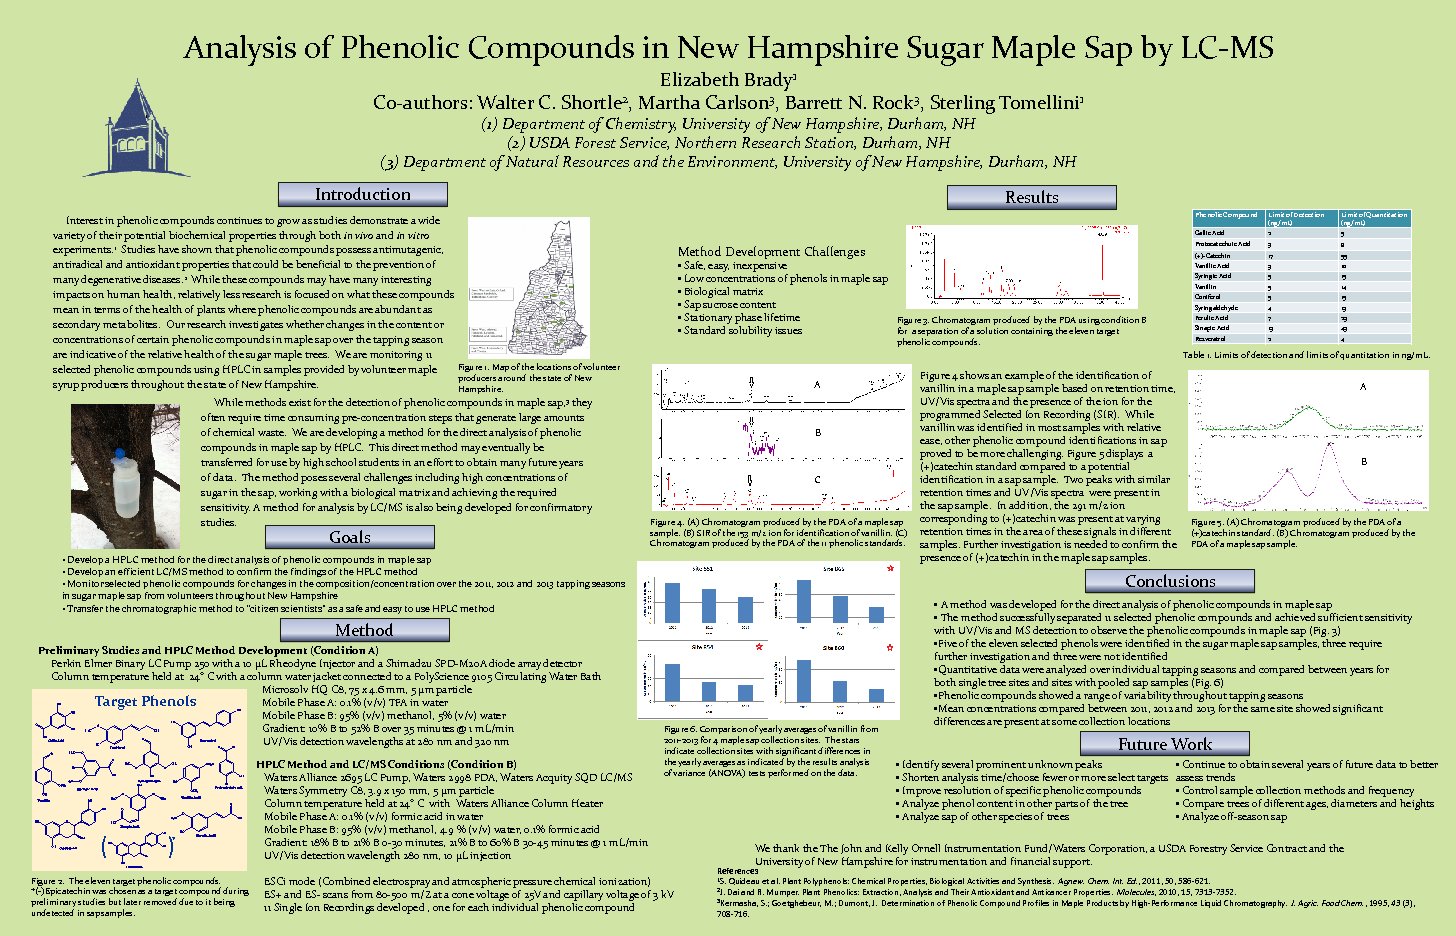 Analysis Of Phenolic Compounds In New Hampshire Sugar Maple Sap By Lc-Ms by ebrady30